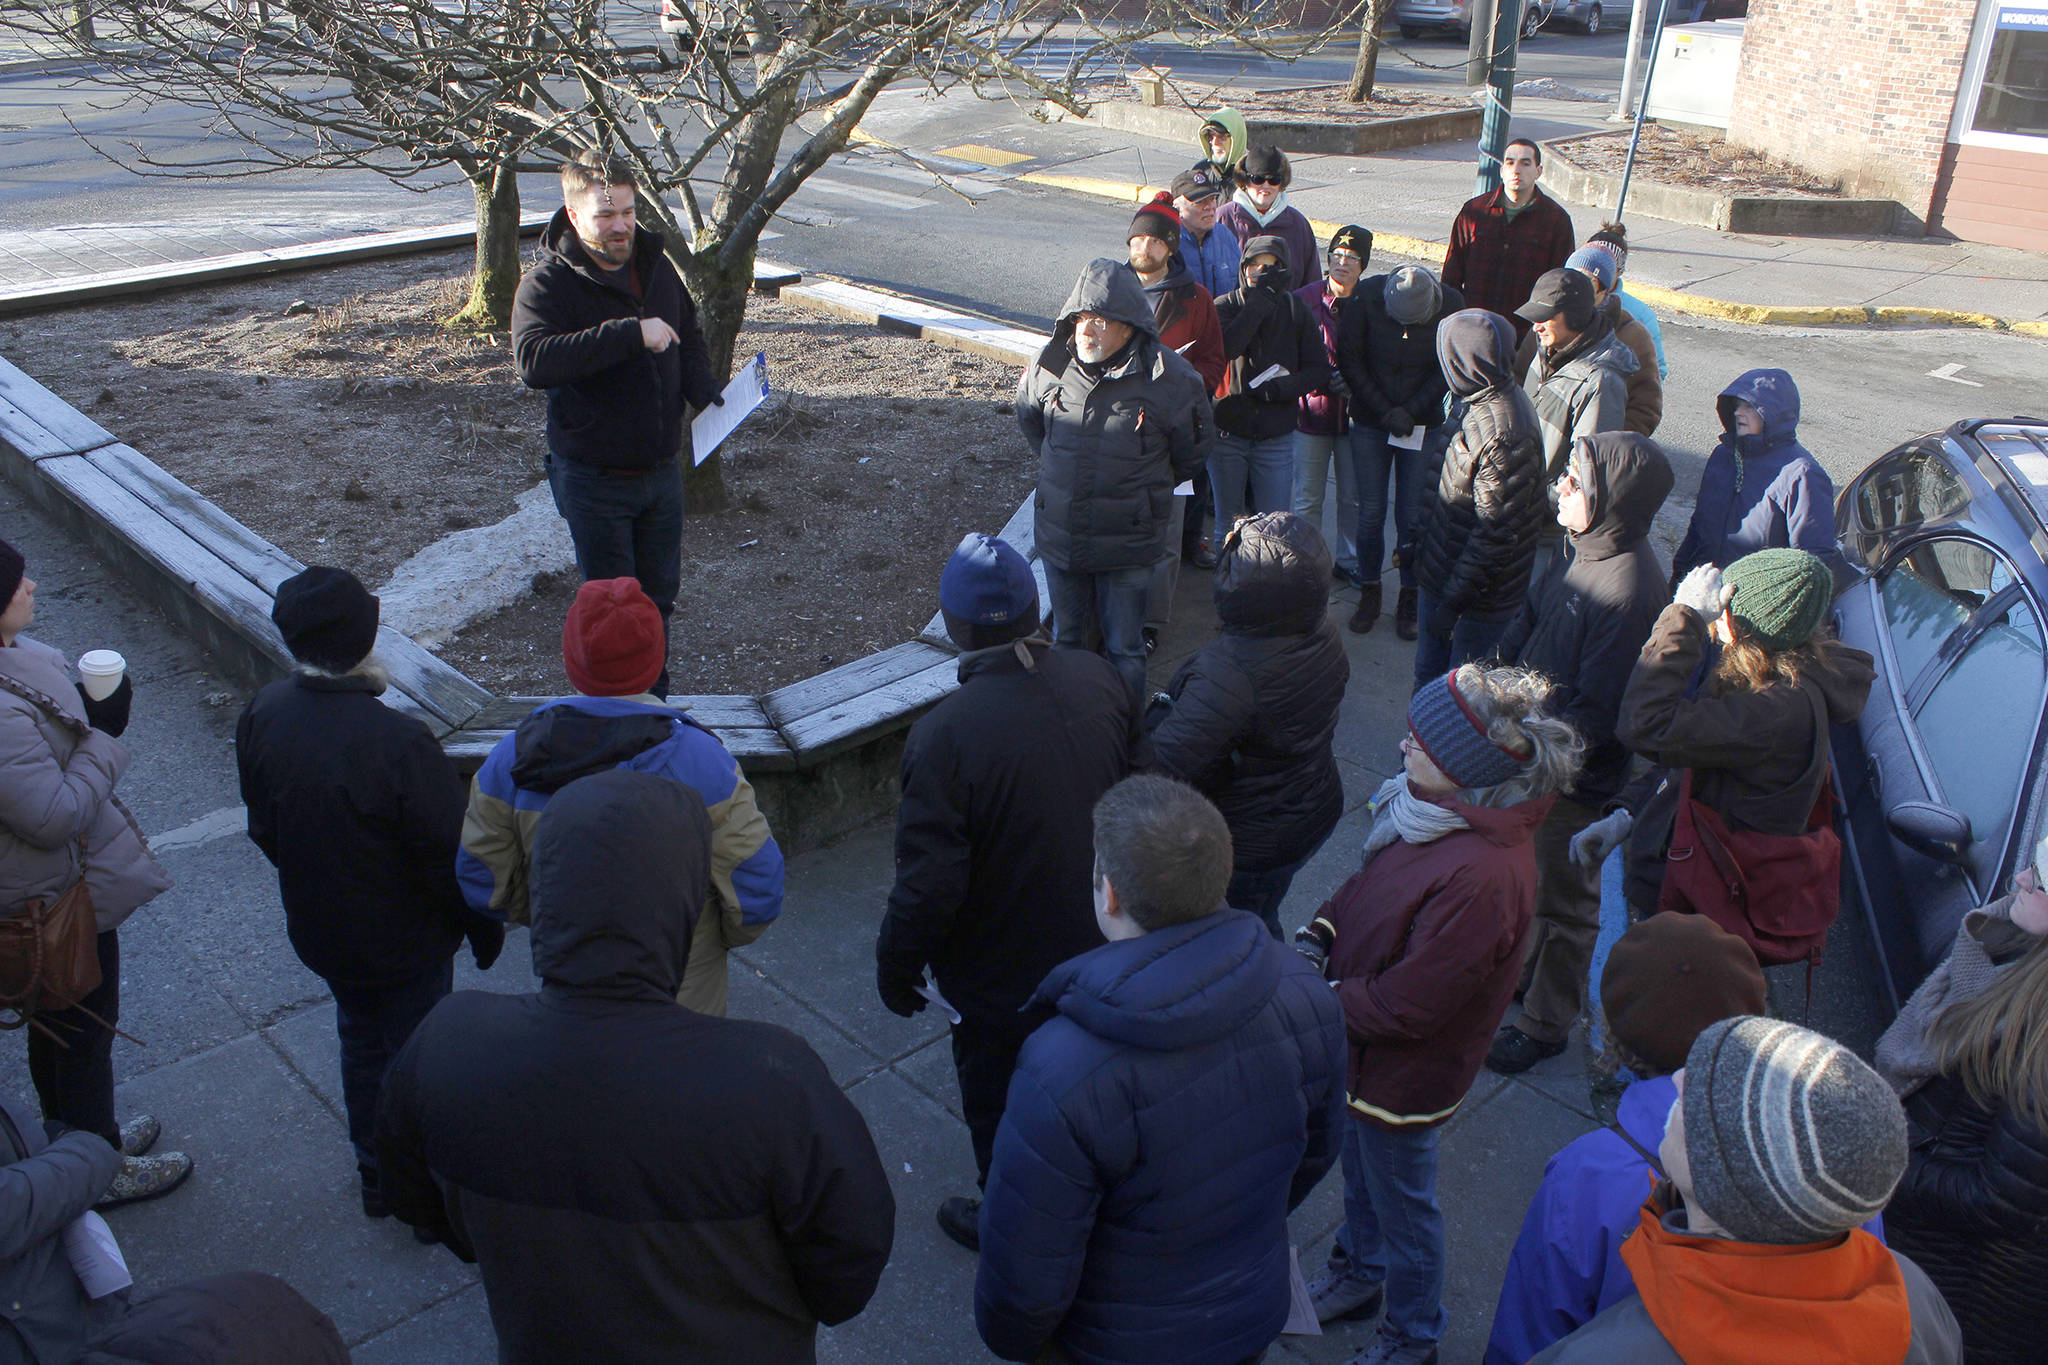 Zane Jones from MRV Architects speaks to attendees at a Blueprint Downtown walking tour on Saturday. Attendees shared their thoughts and experiences about downtown business, housing and public safety. (Alex McCarthy | Juneau Empire)